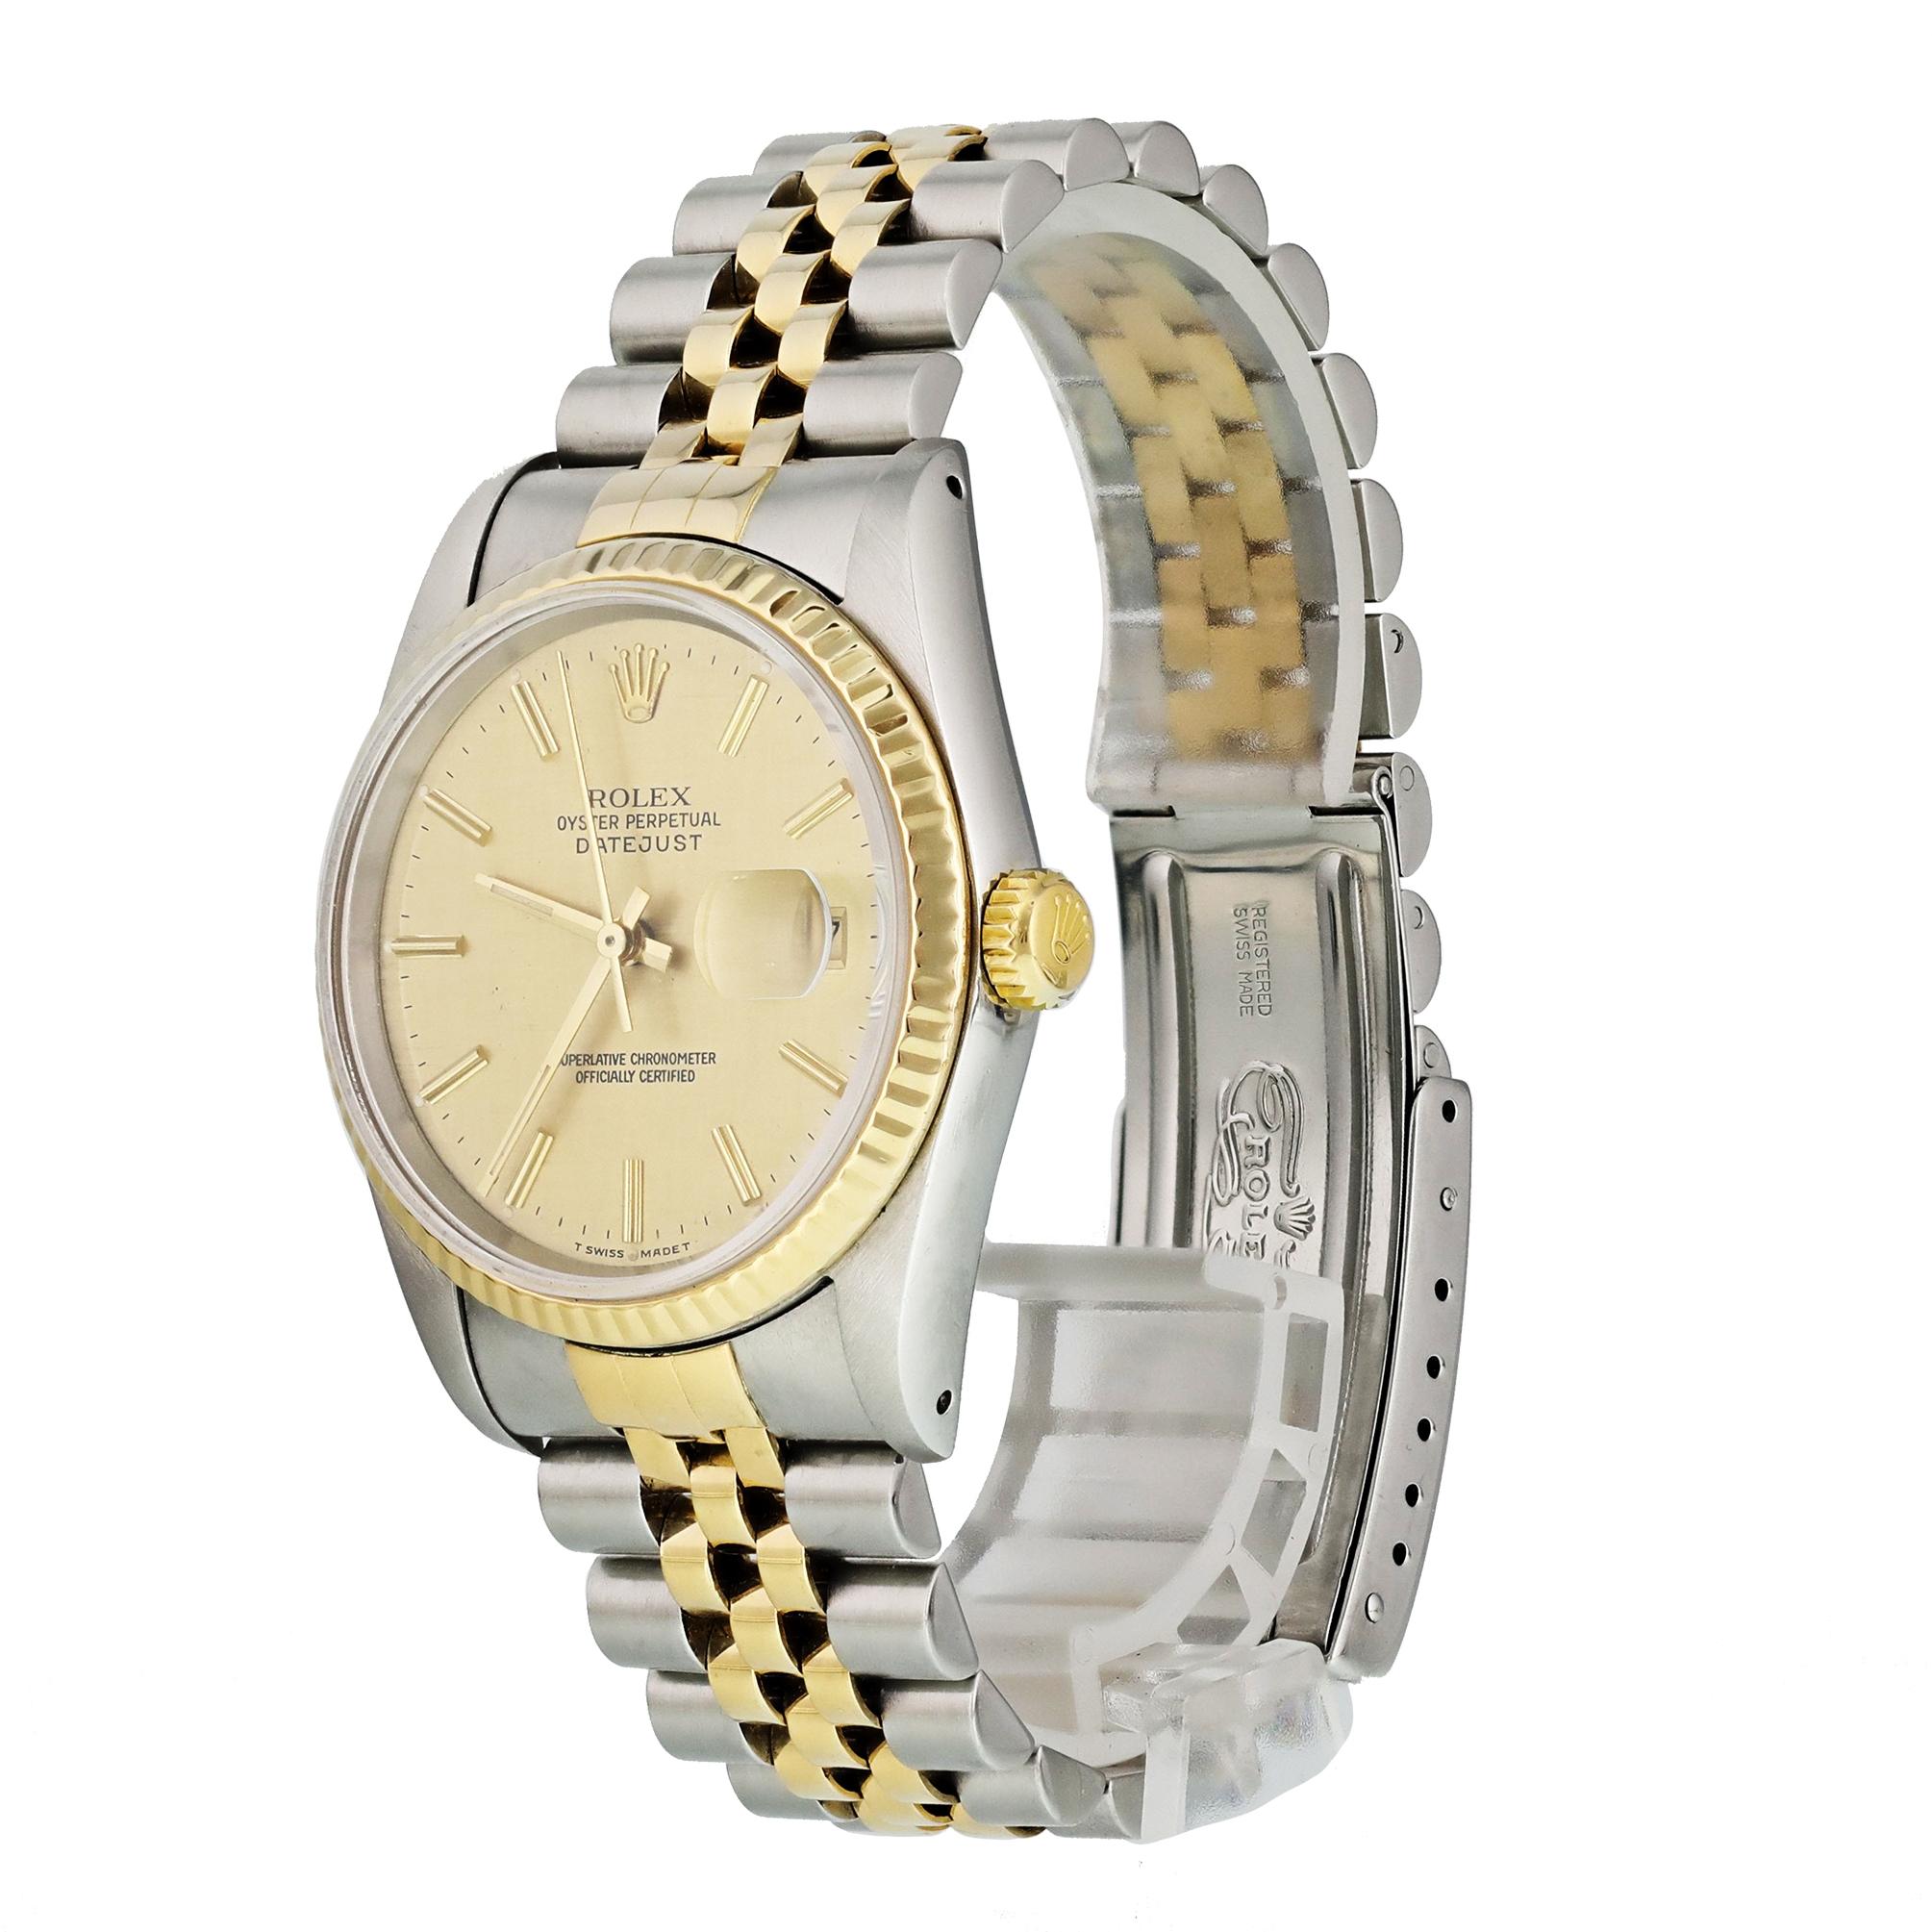 Rolex Datejust 16233 Linen Dial Men's Watch
36mm Stainless Steel case. 
Yellow Gold Fluted Bezel. 
Champagne Linen dial with Luminous gold hands and index hour markers. 
Minute markers on the outer dial. 
Date display at the 3 o'clock position.